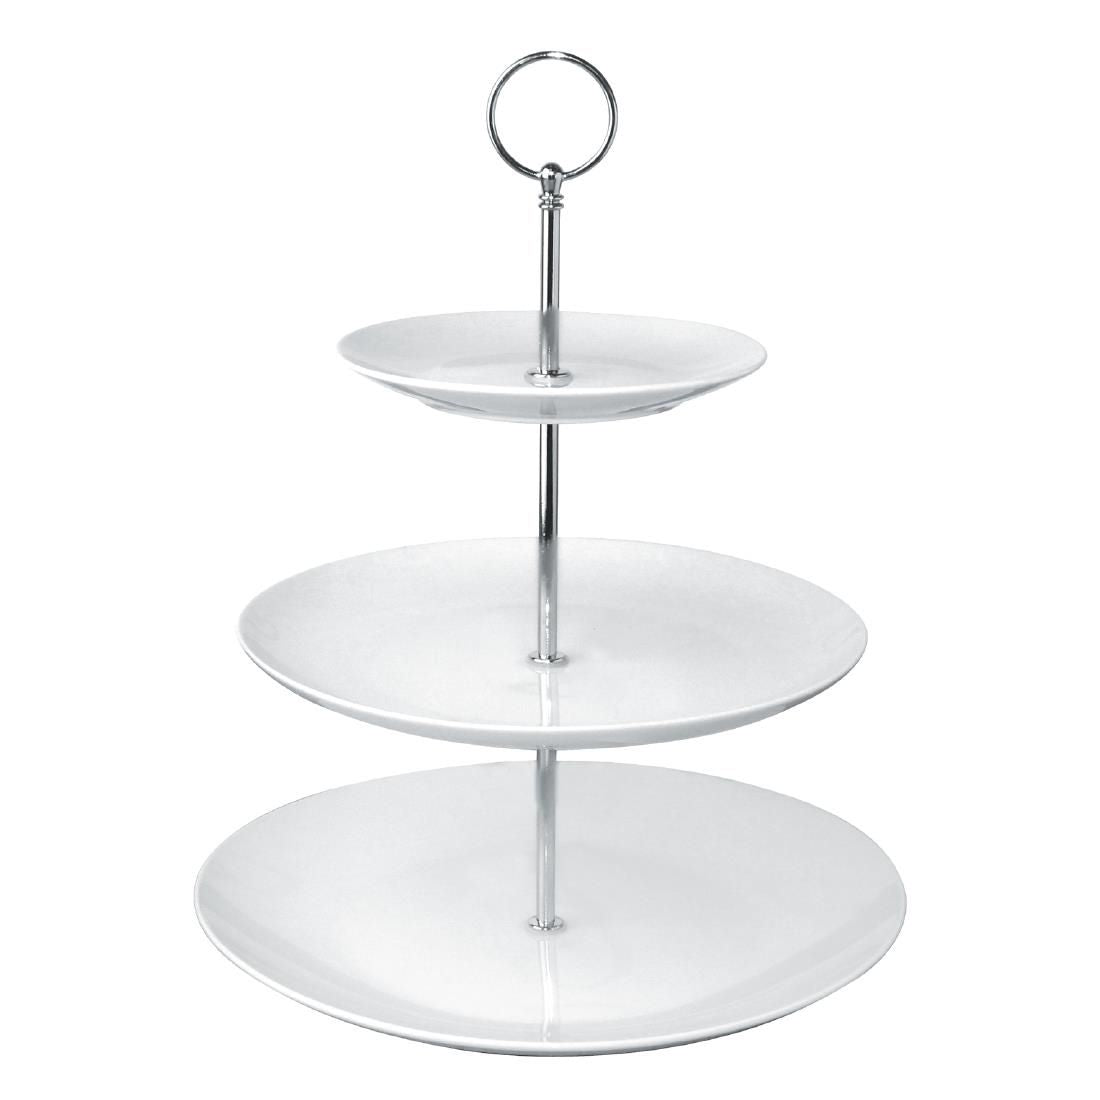 GG881 Olympia 3 Tier Afternoon Tea Cake Stand JD Catering Equipment Solutions Ltd